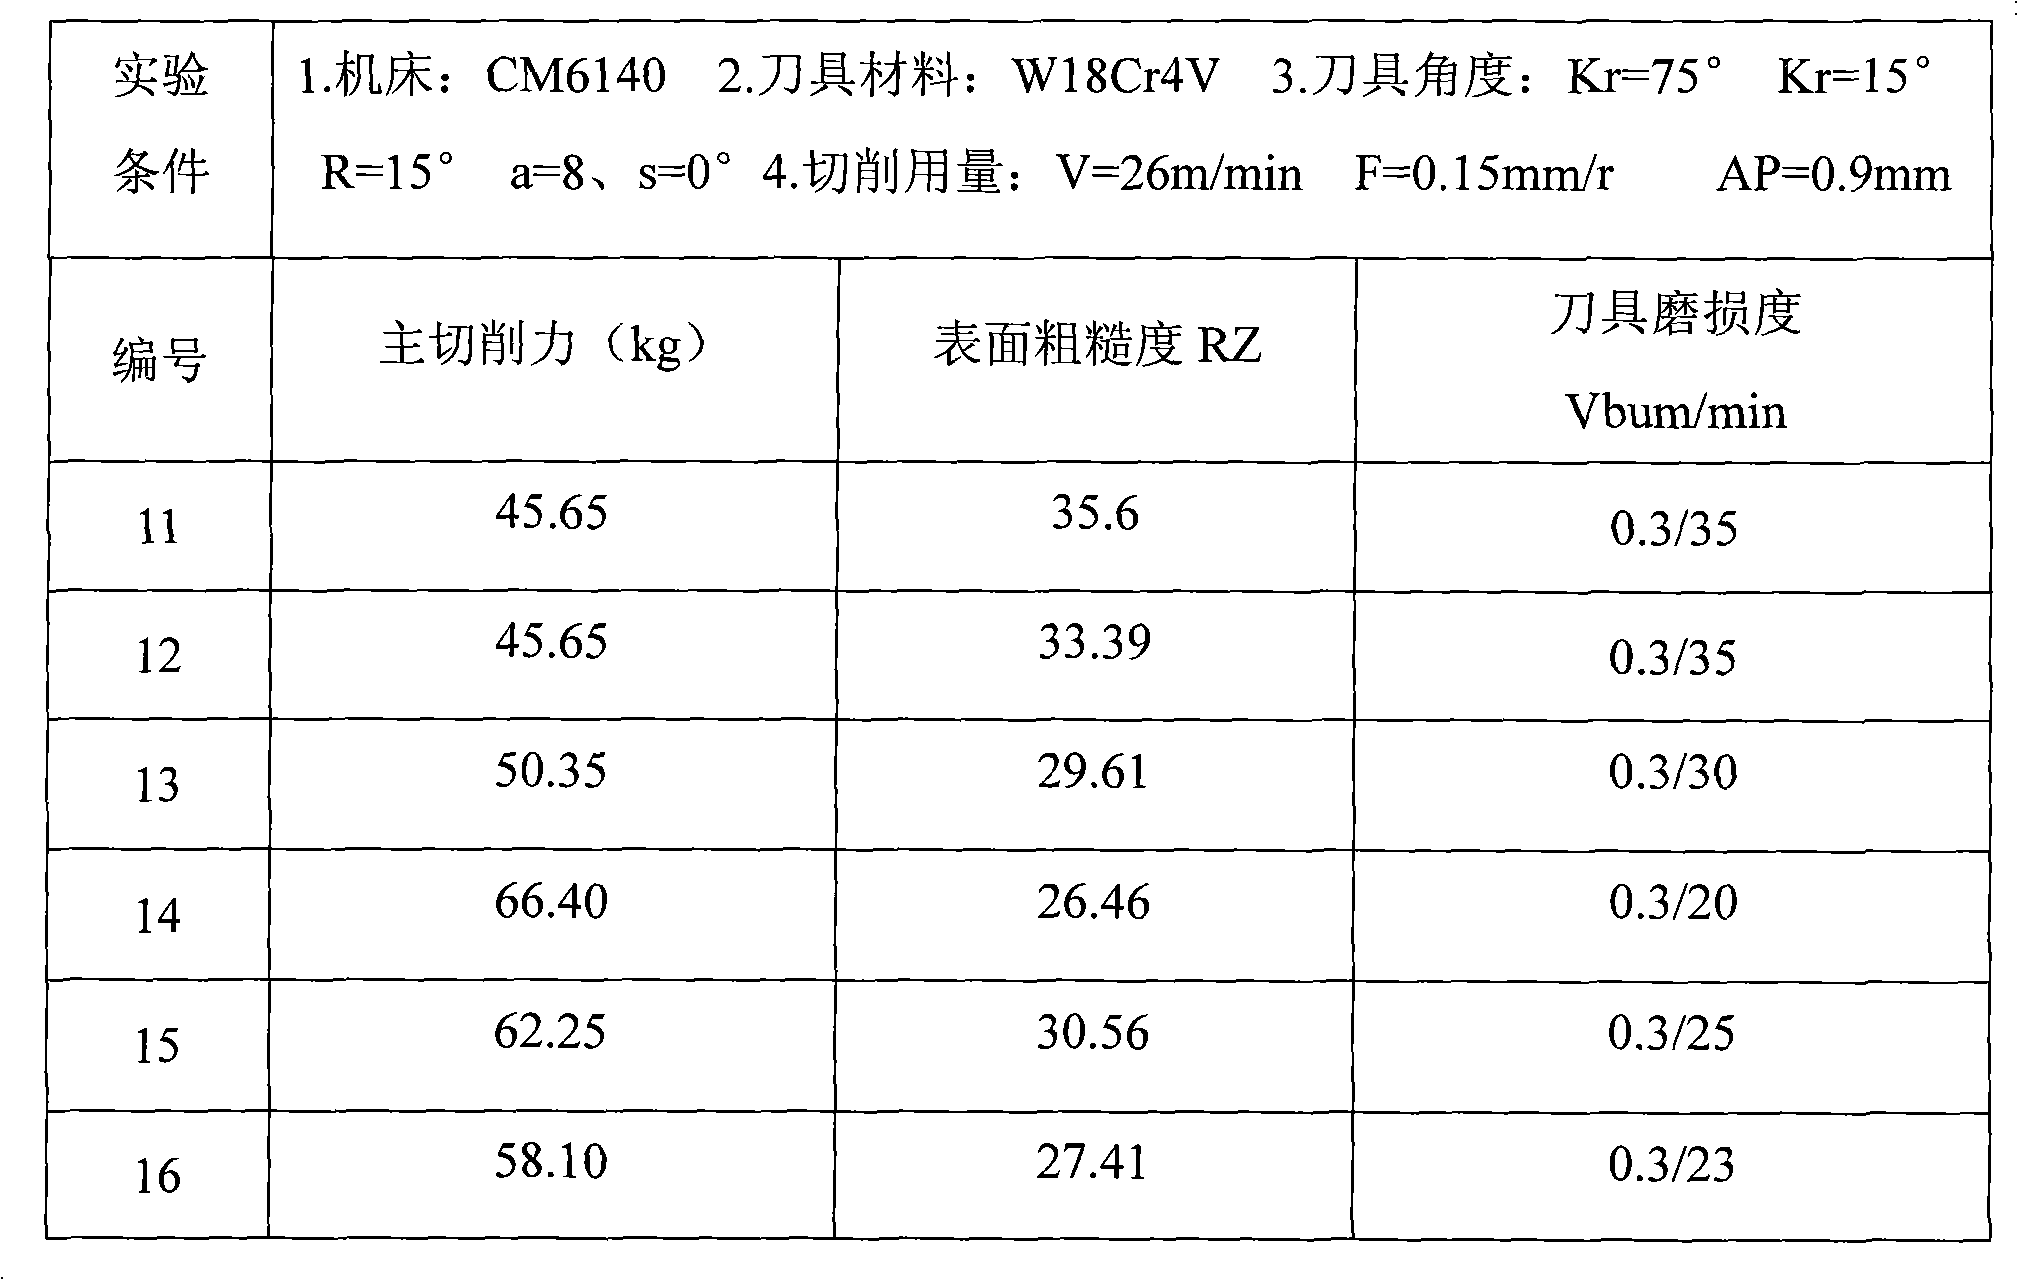 Free-cutting water-atomized steel powder and preparation method thereof